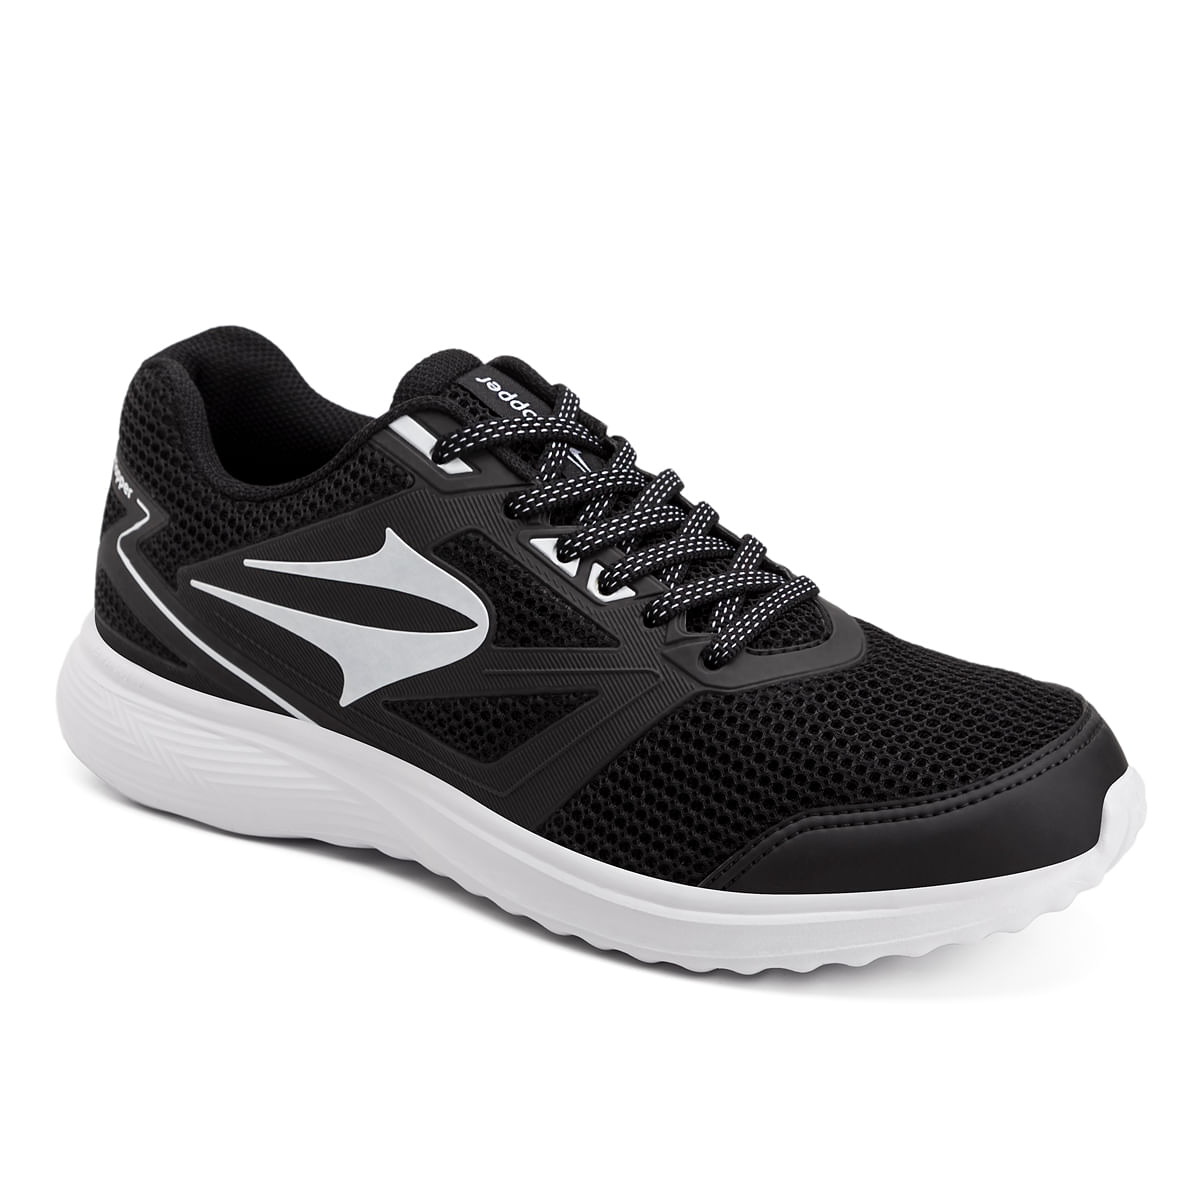 Outlet Zapatillas Running Mujer Topper